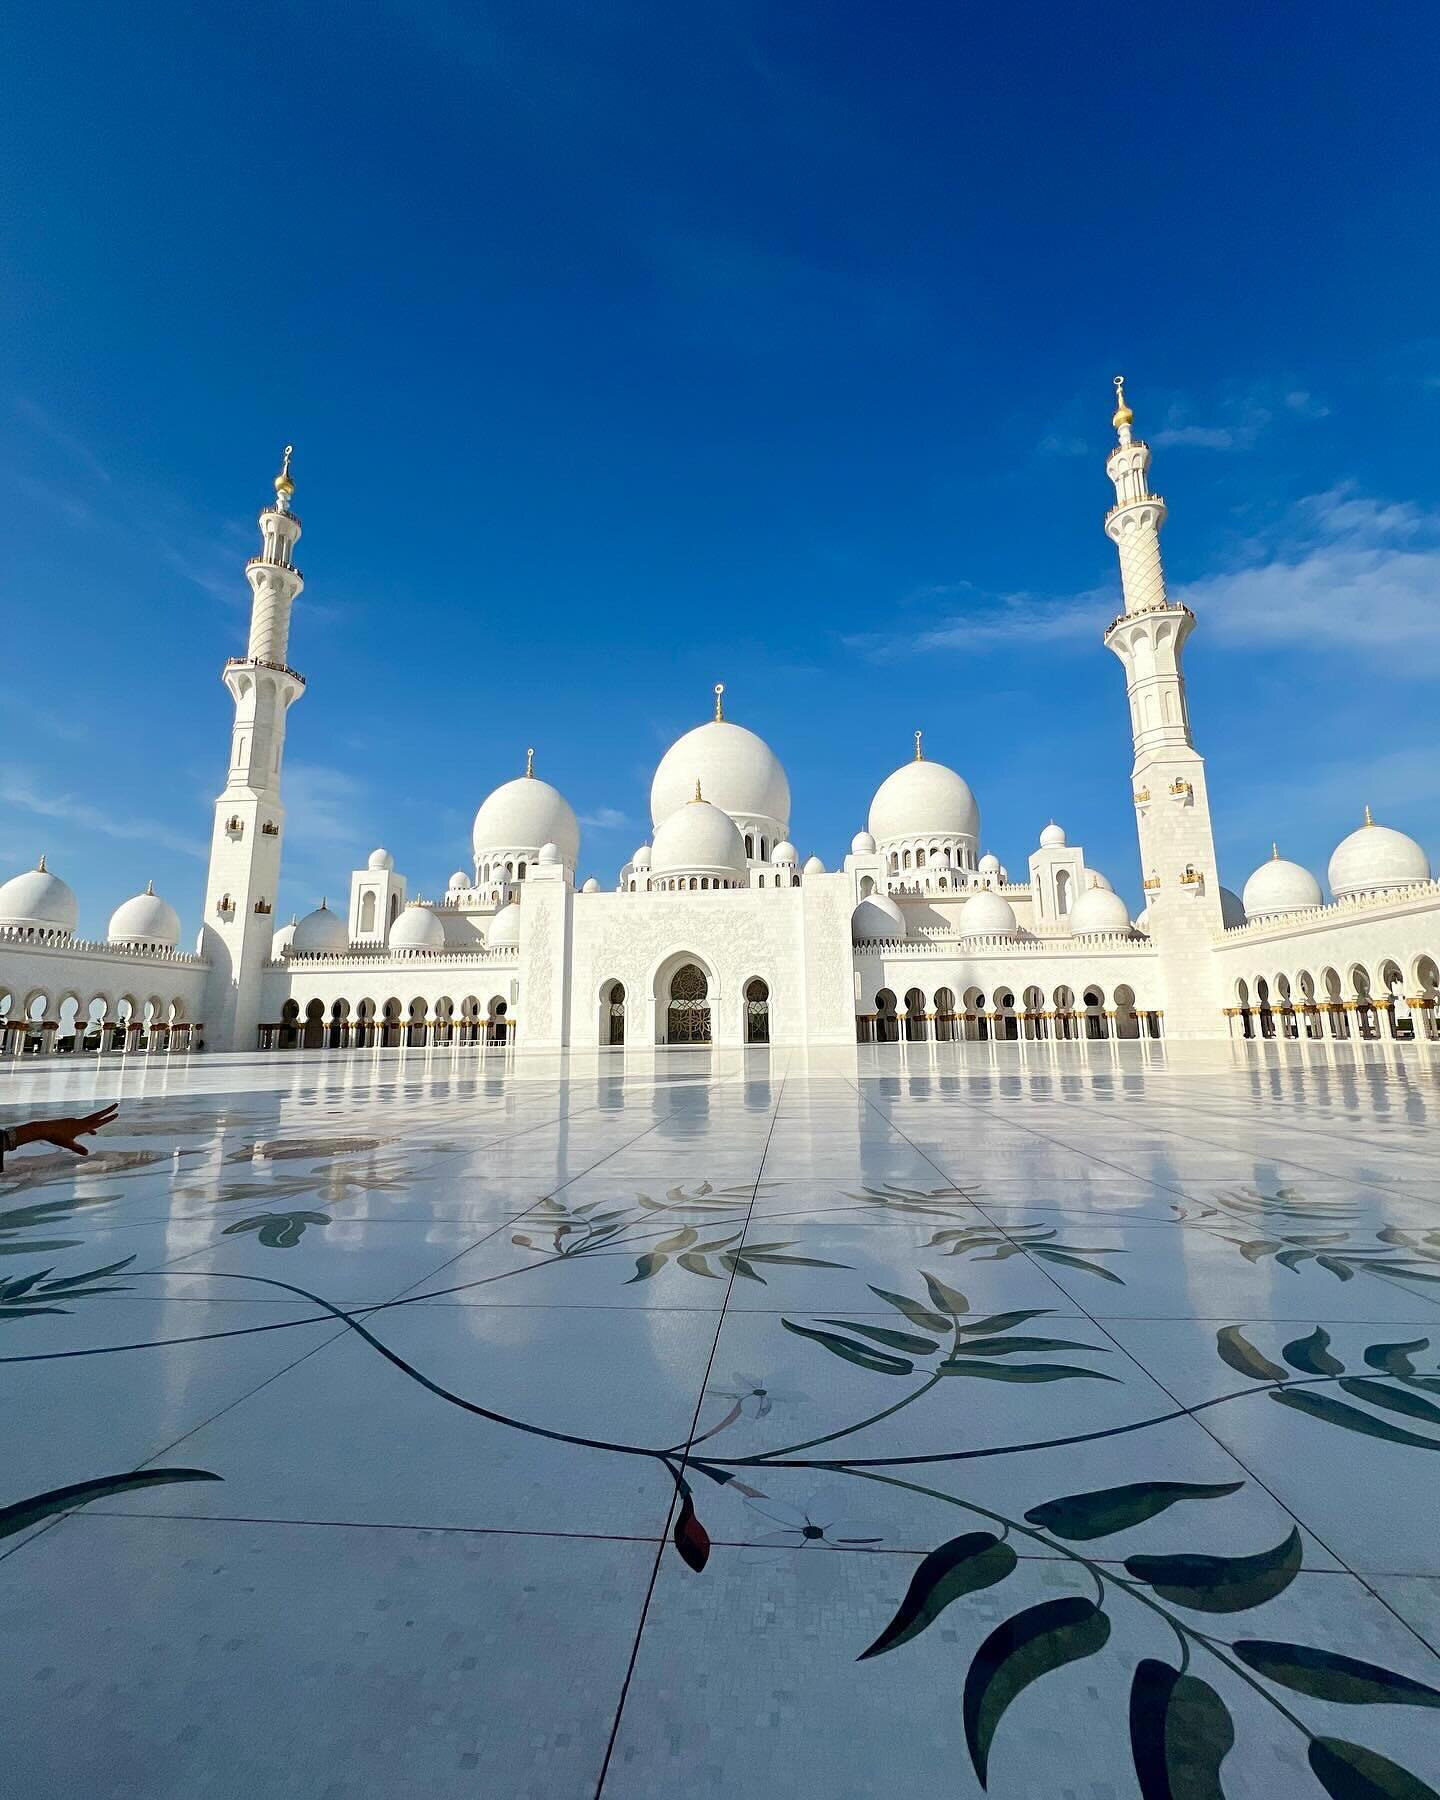 A sidestep to the revelation that is Abu Dhabi - and the Sheikh Zayed Grand Mosque. 10 years to plan, 11 to build - the vision of a man whose dream was to unify people from all over the world. Sheikh Zayed died before it was finished but is buried on